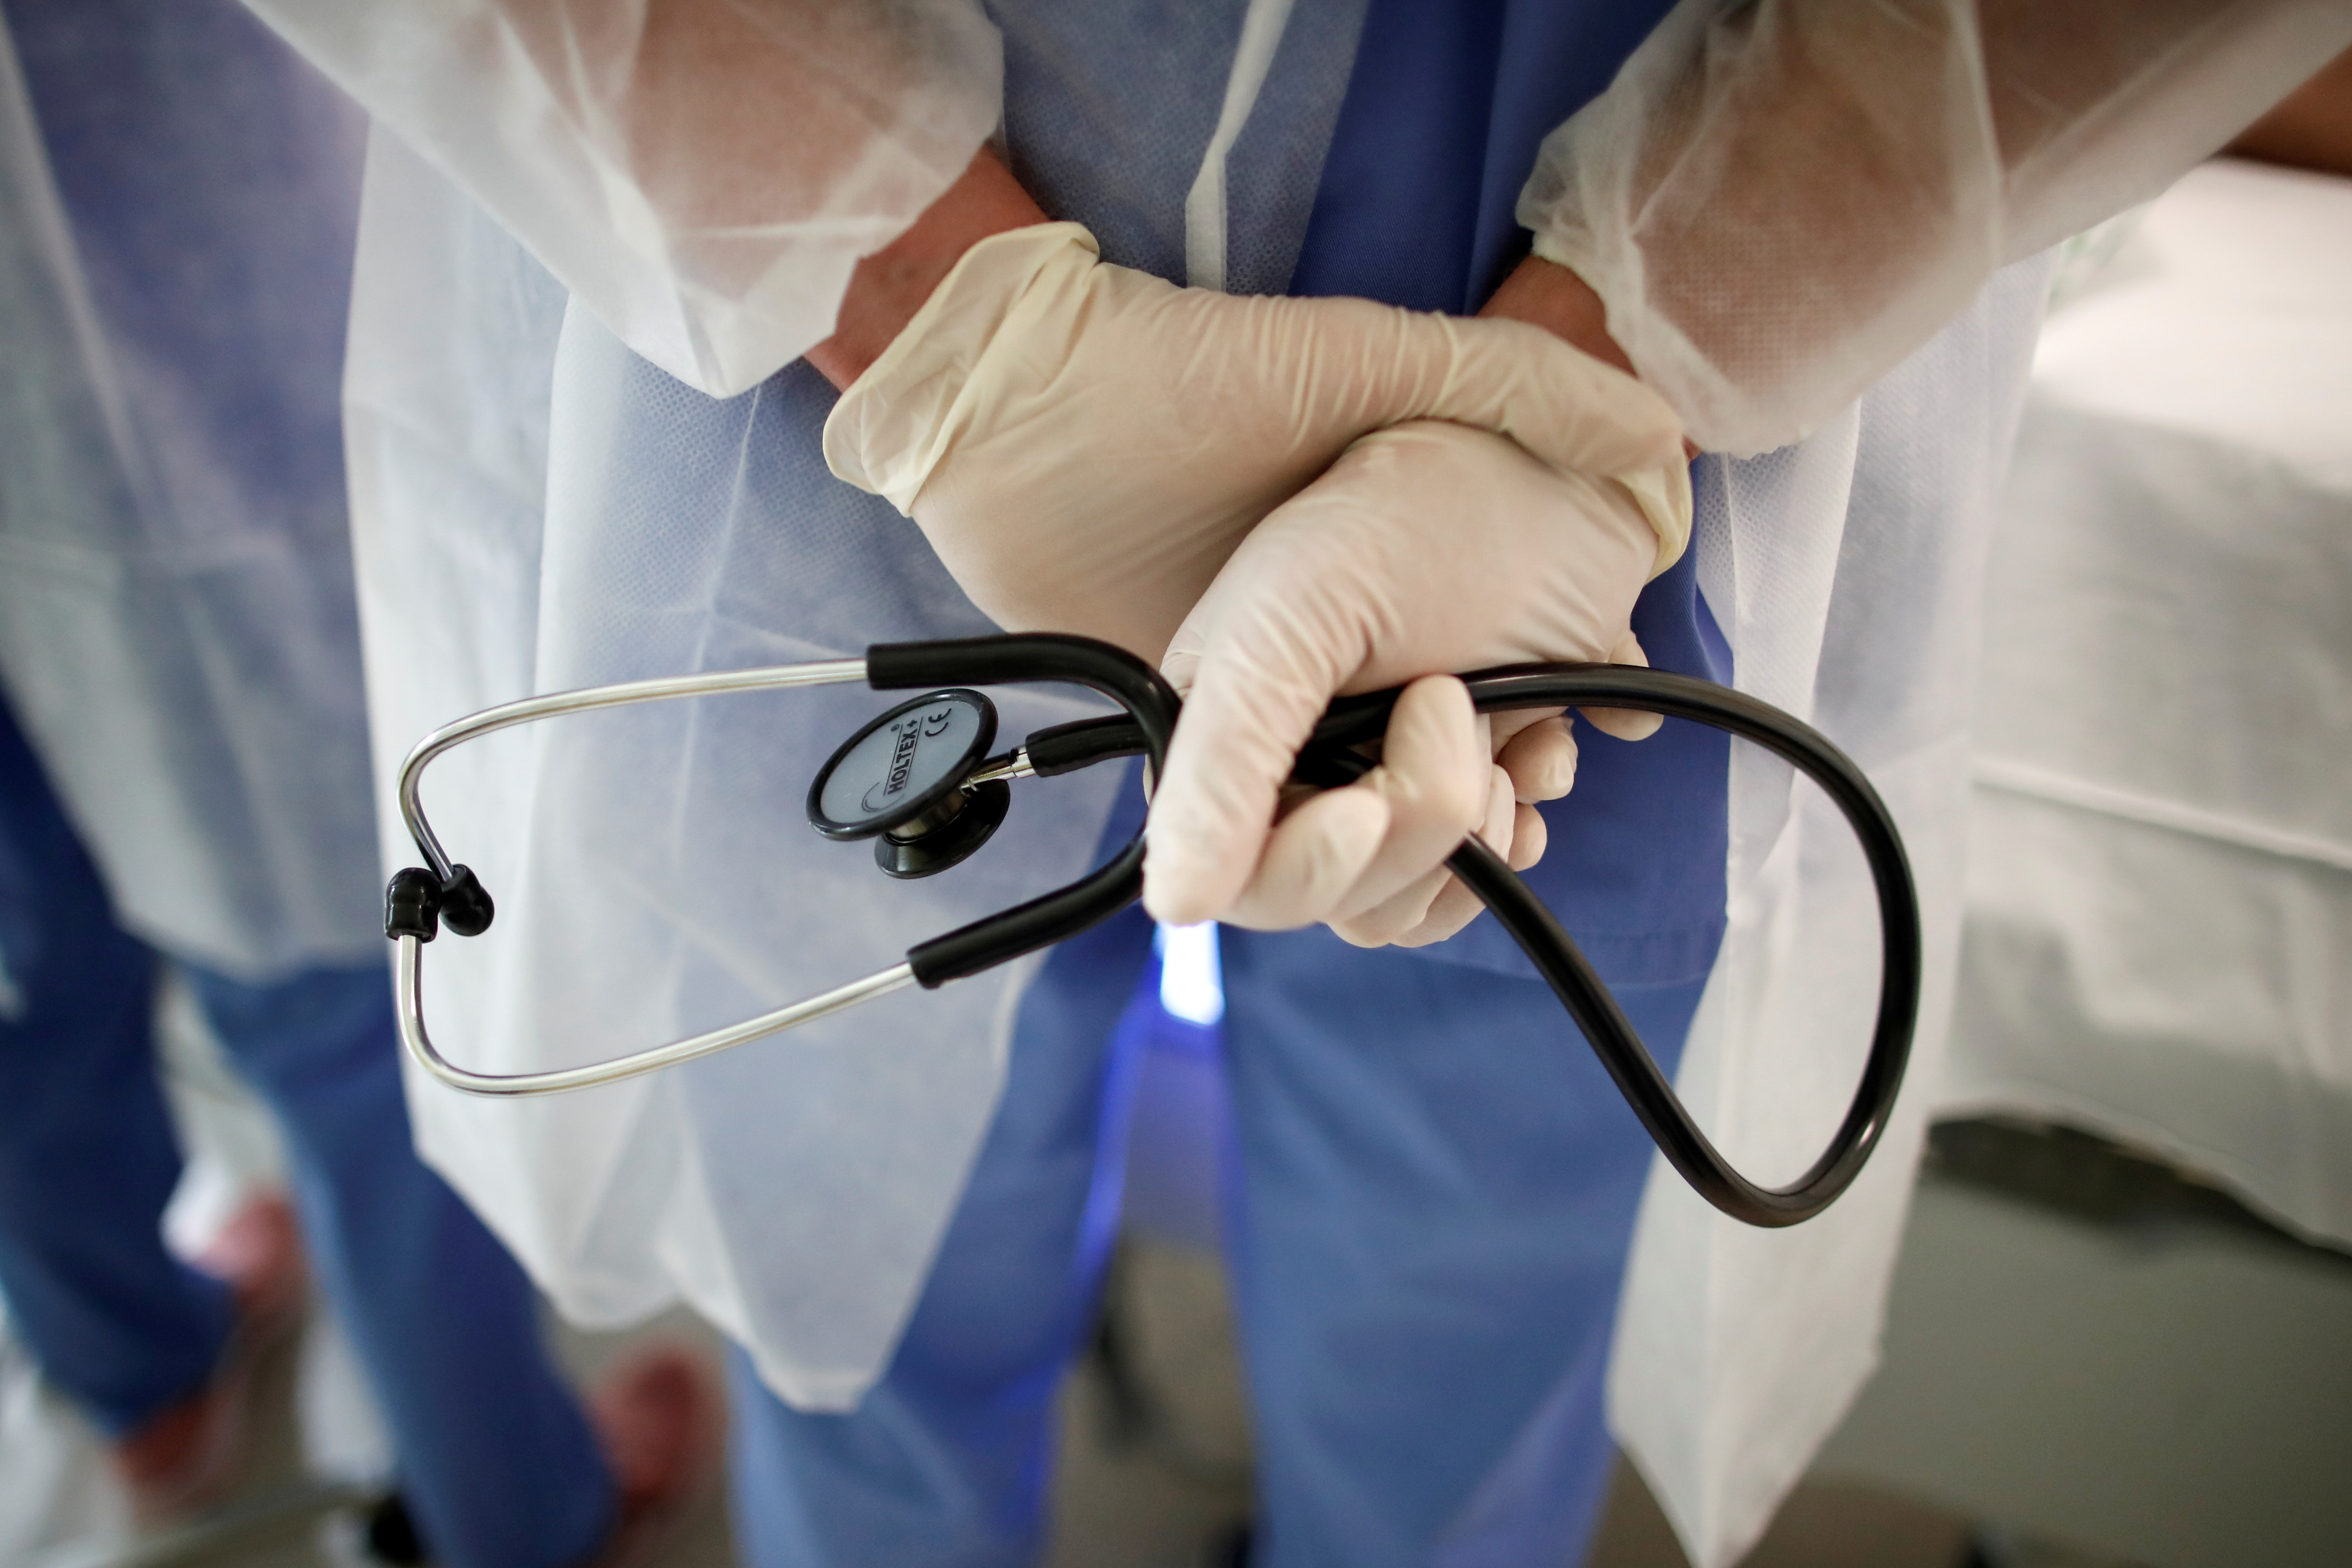 A doctor holds a stethoscope